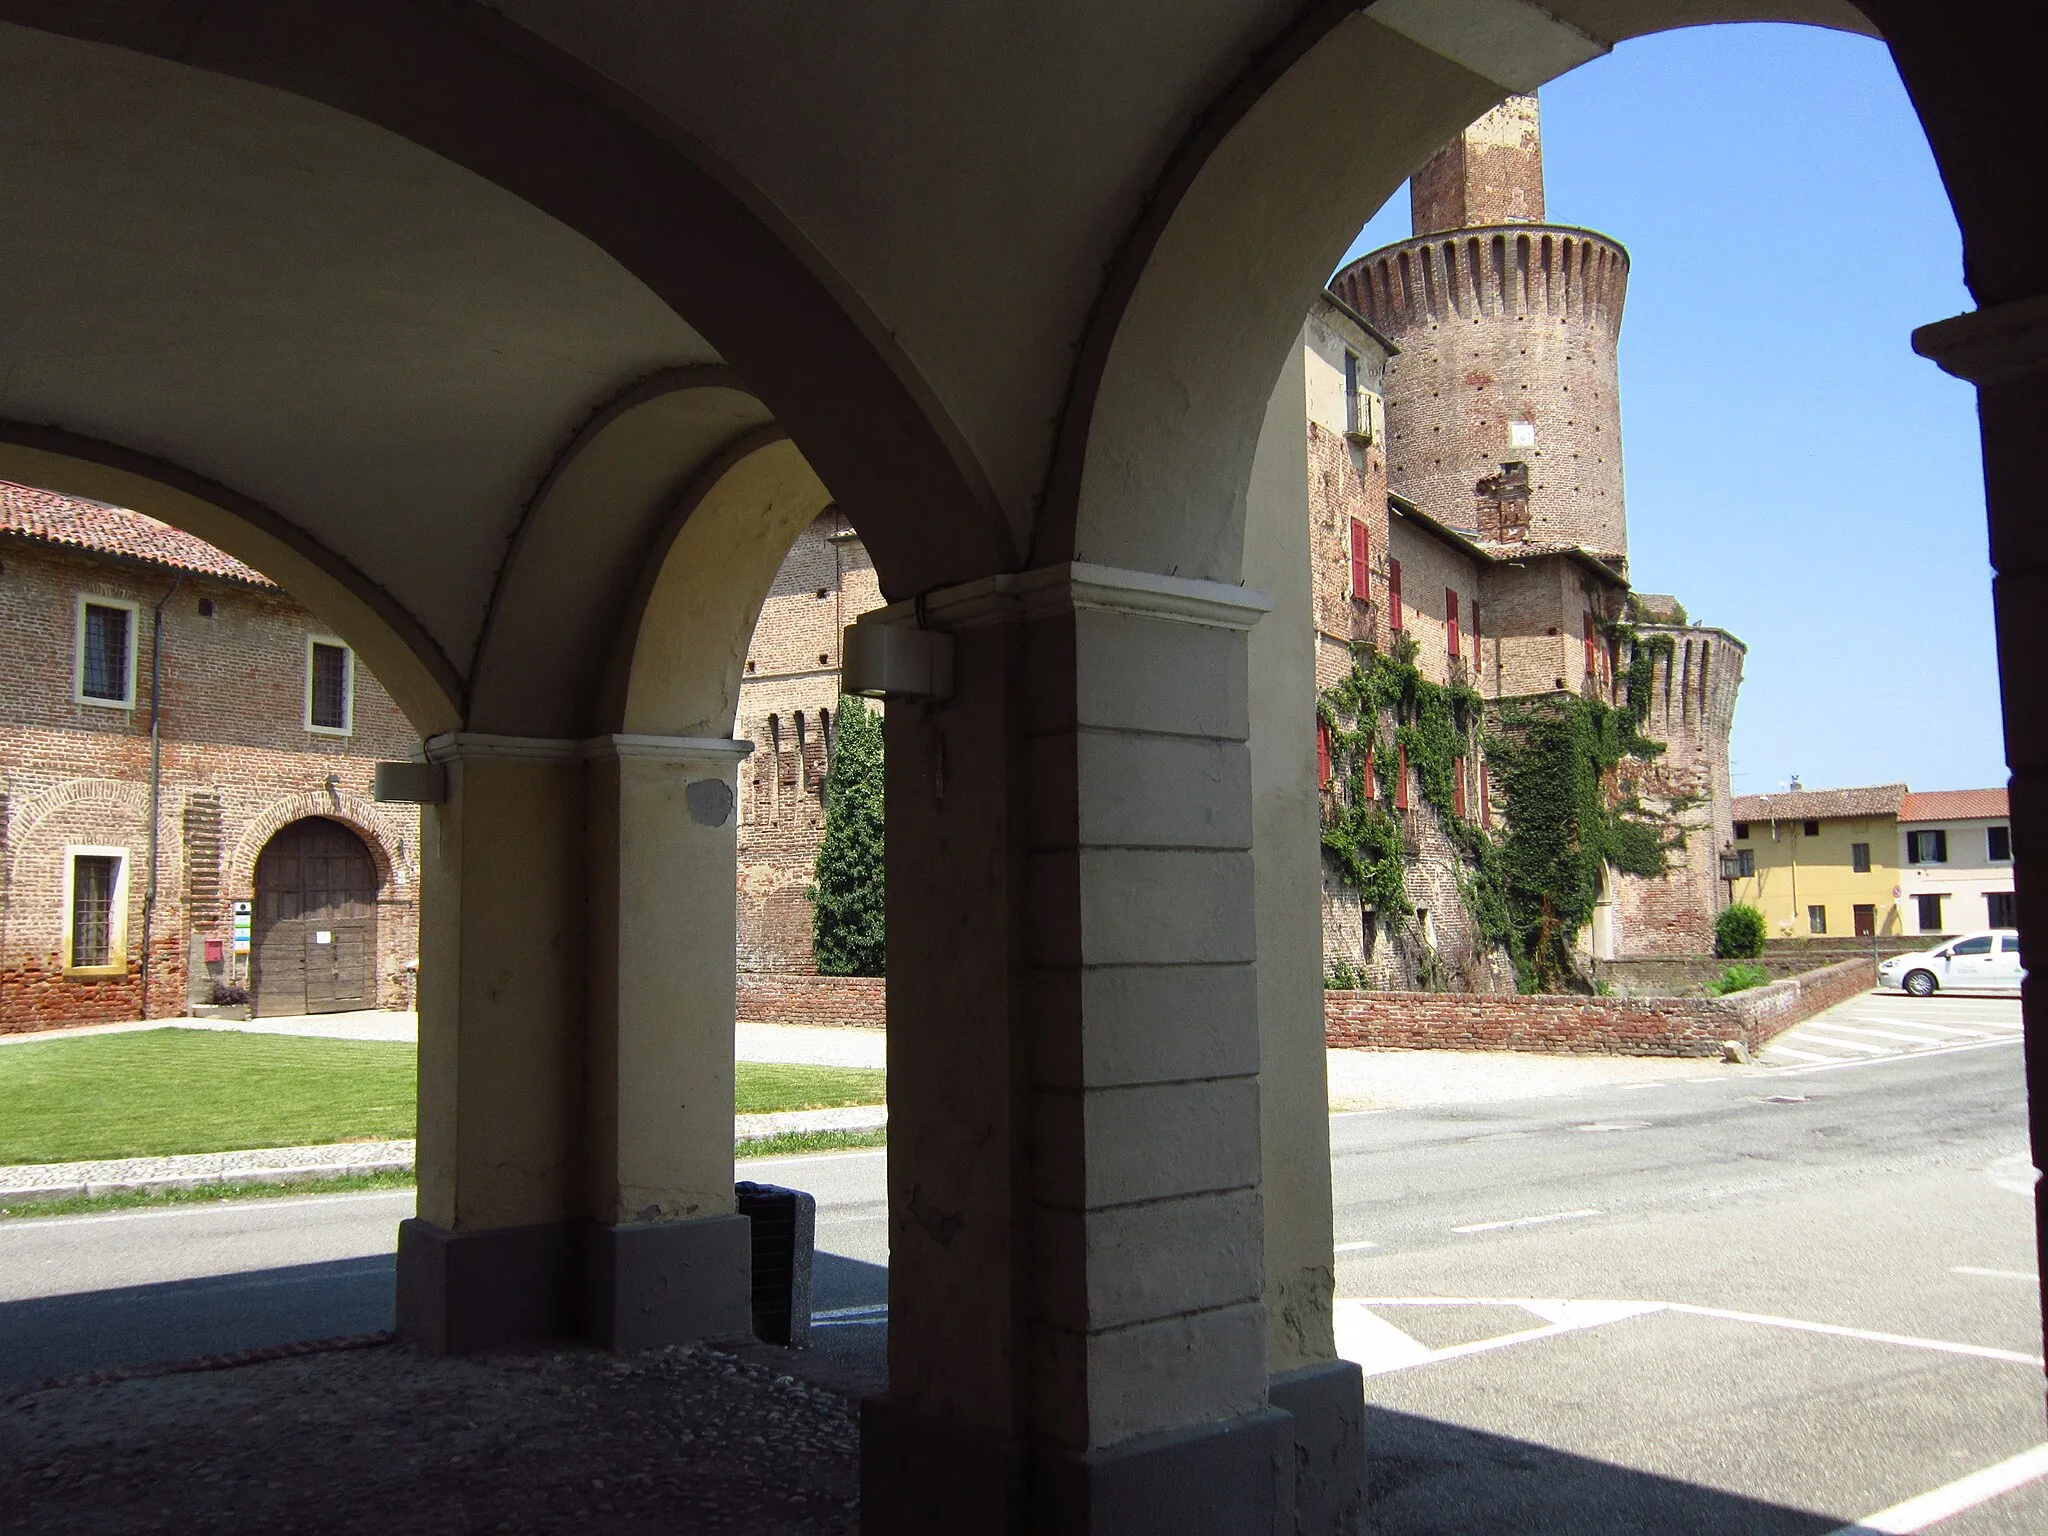 Photo showing: The castle of Sartirana, Pavia, Italy, from under the arcades